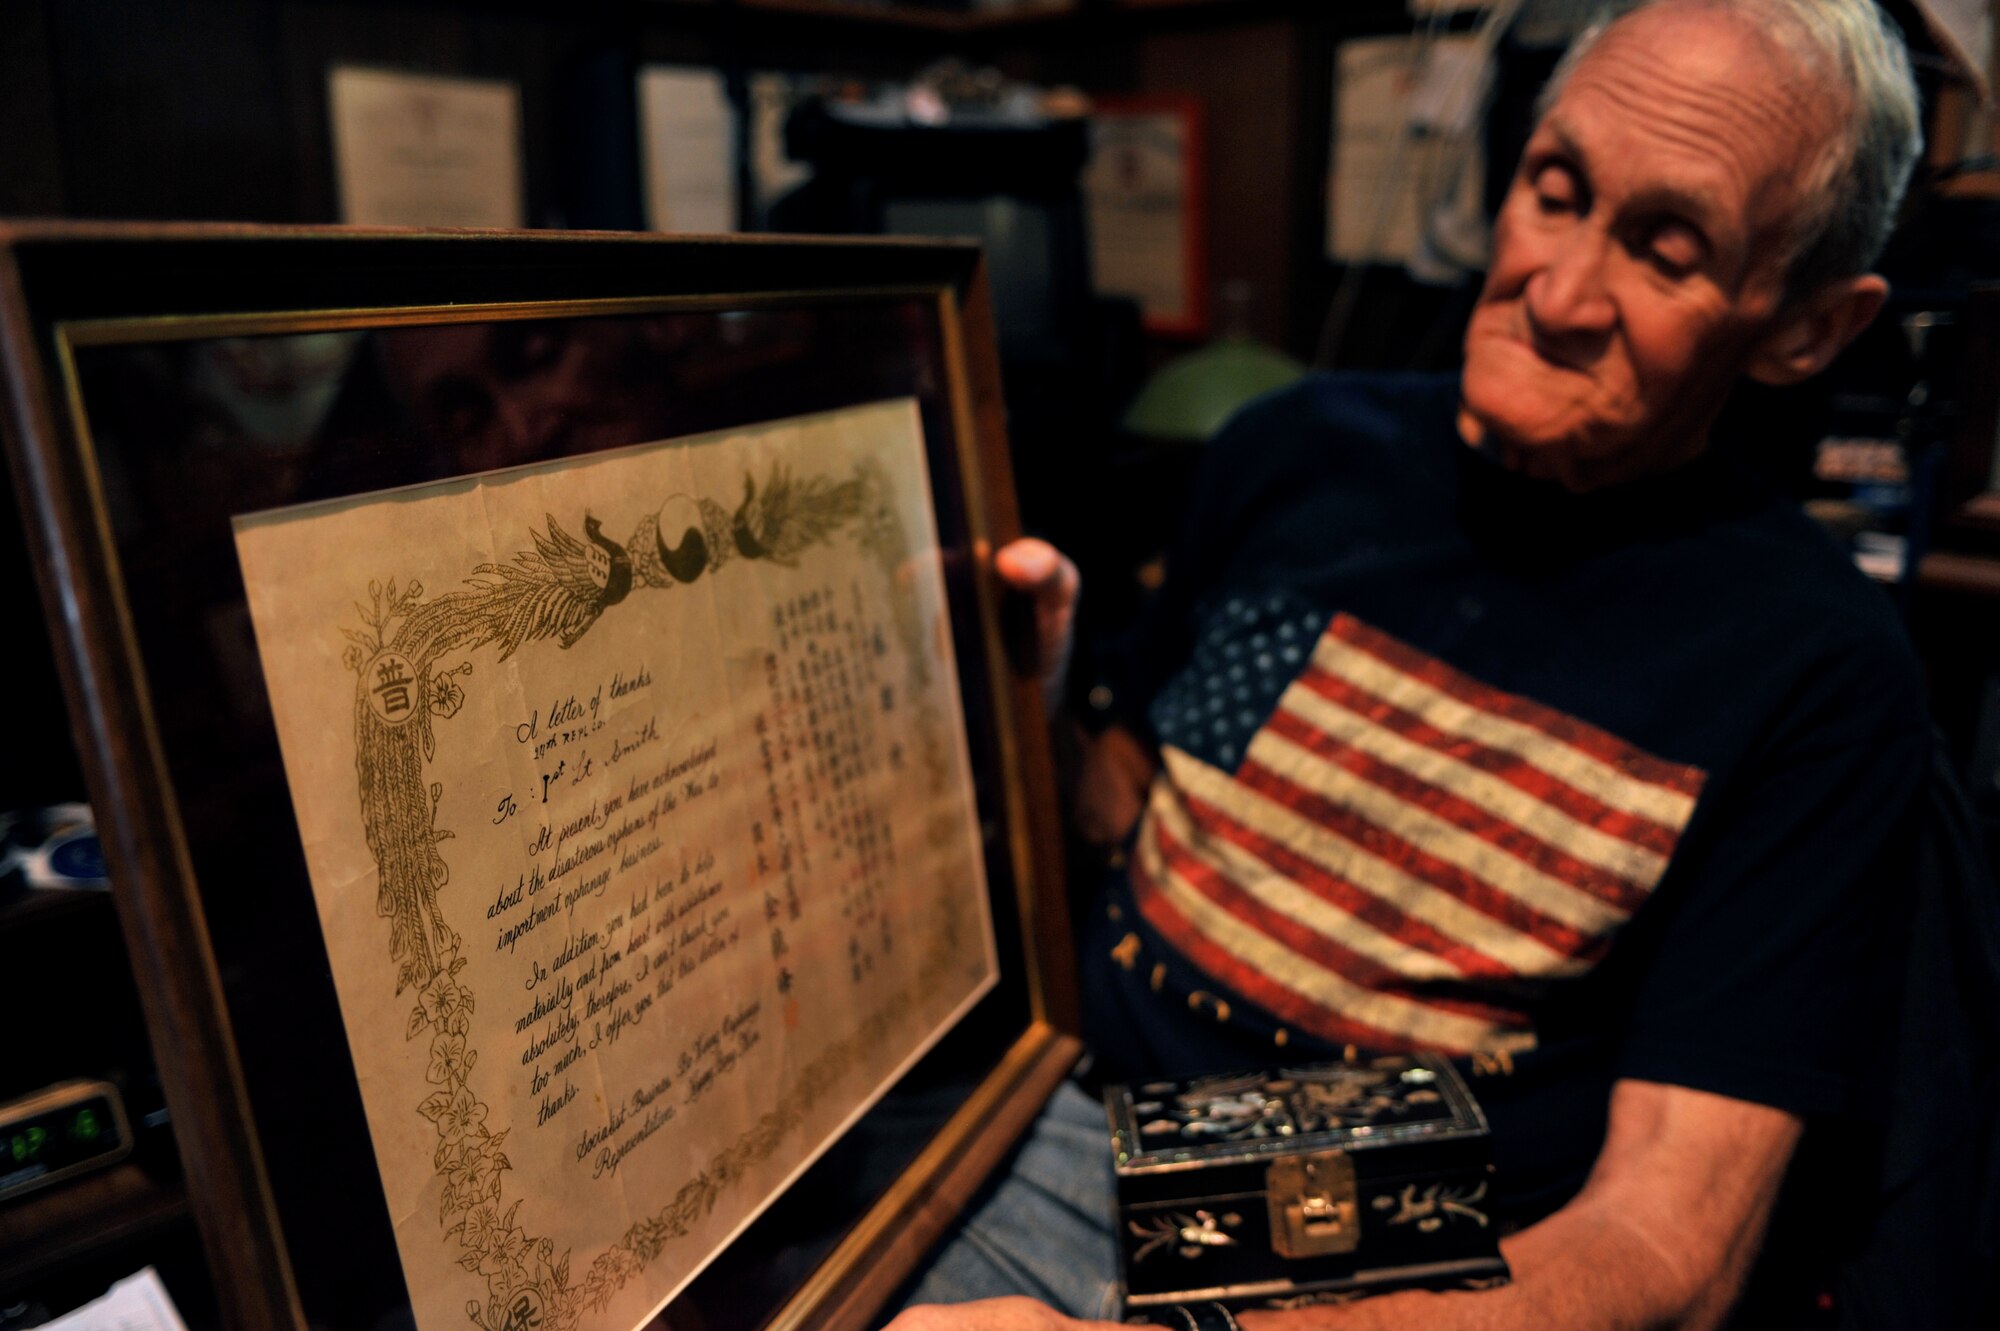 Retired U.S. Army Maj. E. Vernon Smith Jr. looks at a framed letter of appreciation from a South Korean orphanage while in his home in central Virginia, July 20, 2013. Smith donated clothes and toys to the orphanage while stationed near the Korean demilitarized zone in 1956, and said seeing the impoverished children made him feel compelled to help. (U.S Air Force photo by Staff Sgt. Katie Gar Ward/Released) 